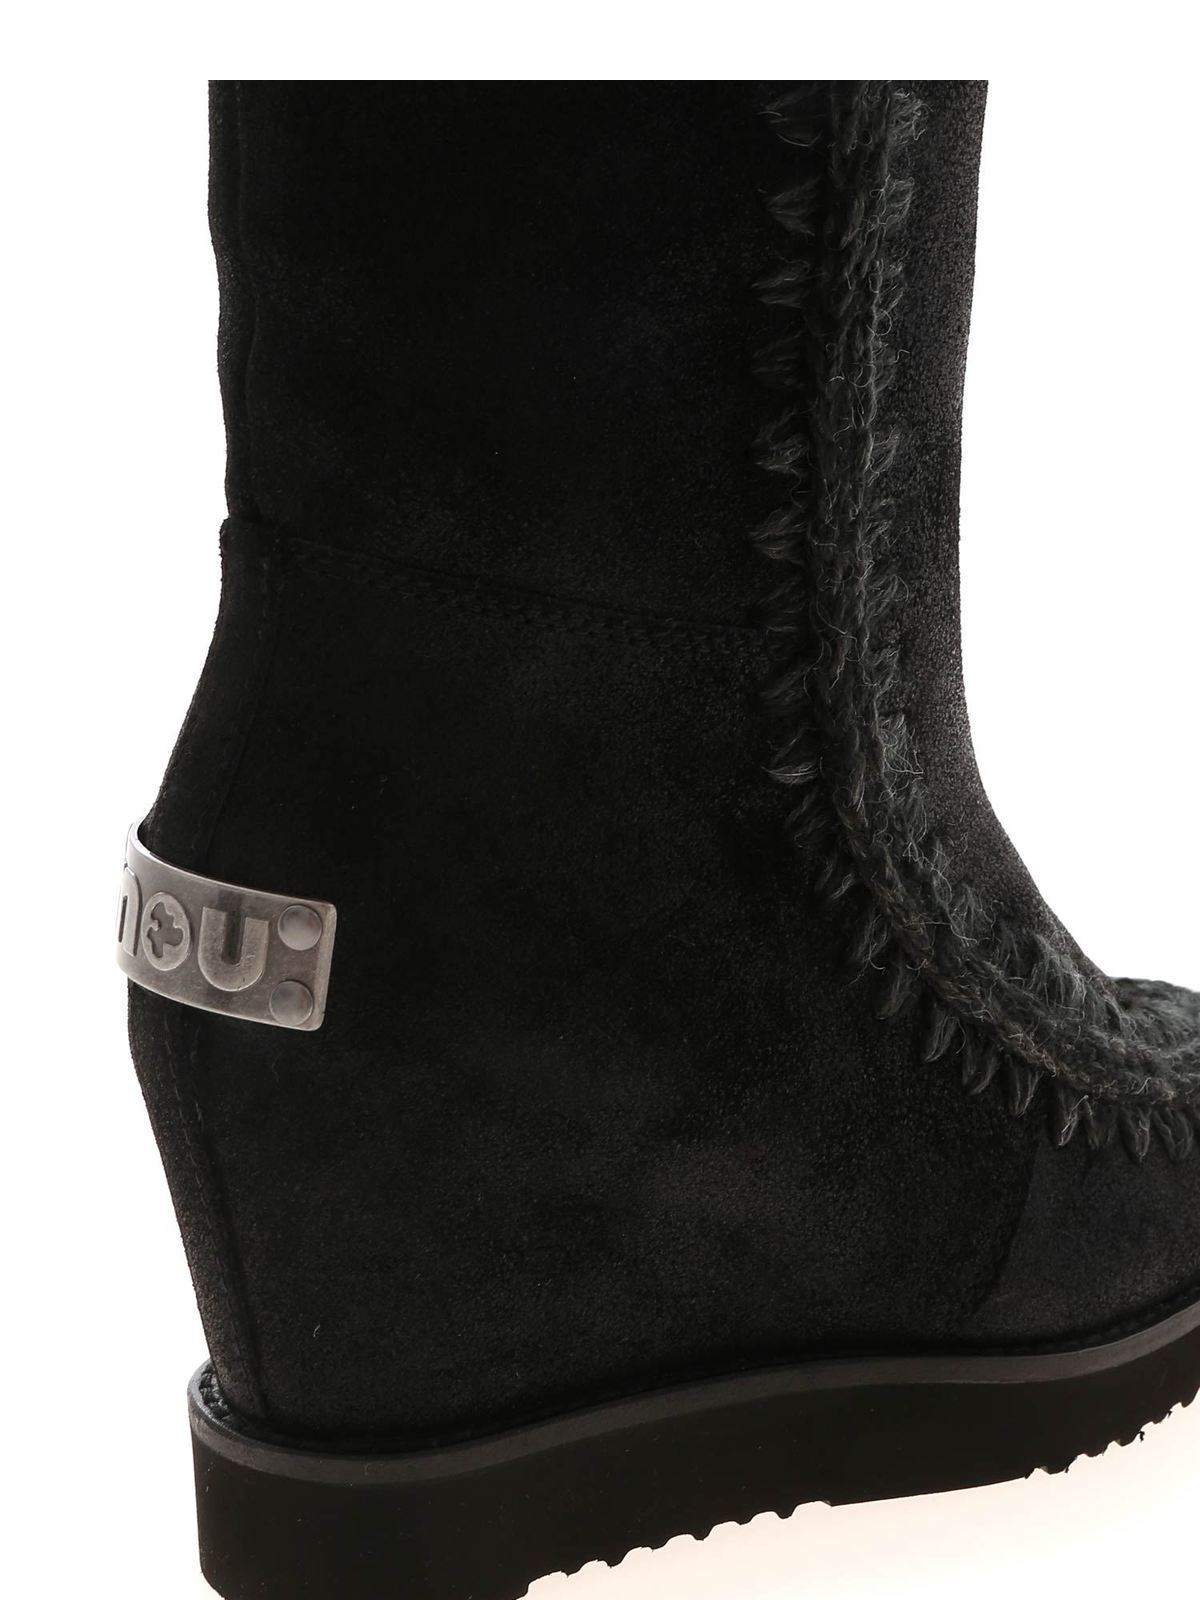 Mou - Eskimo French boots in black 